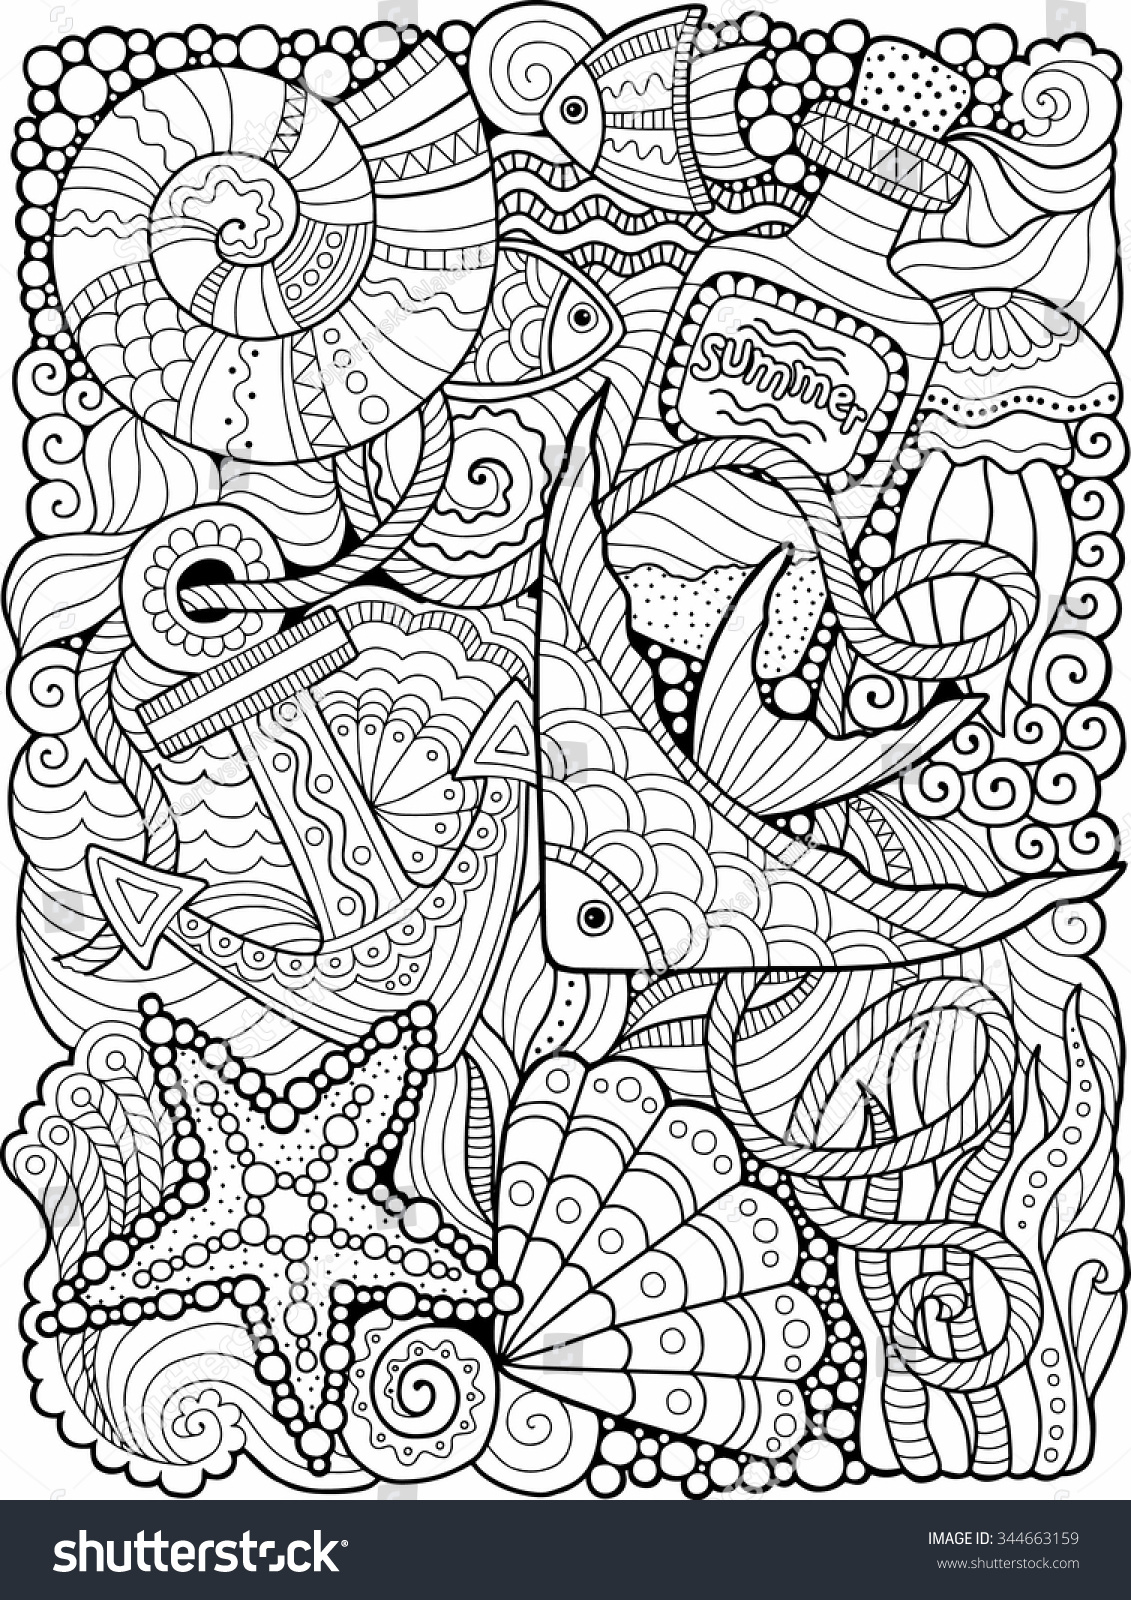 Vector Coloring Book Adult Summers Sea Stock Vector ...